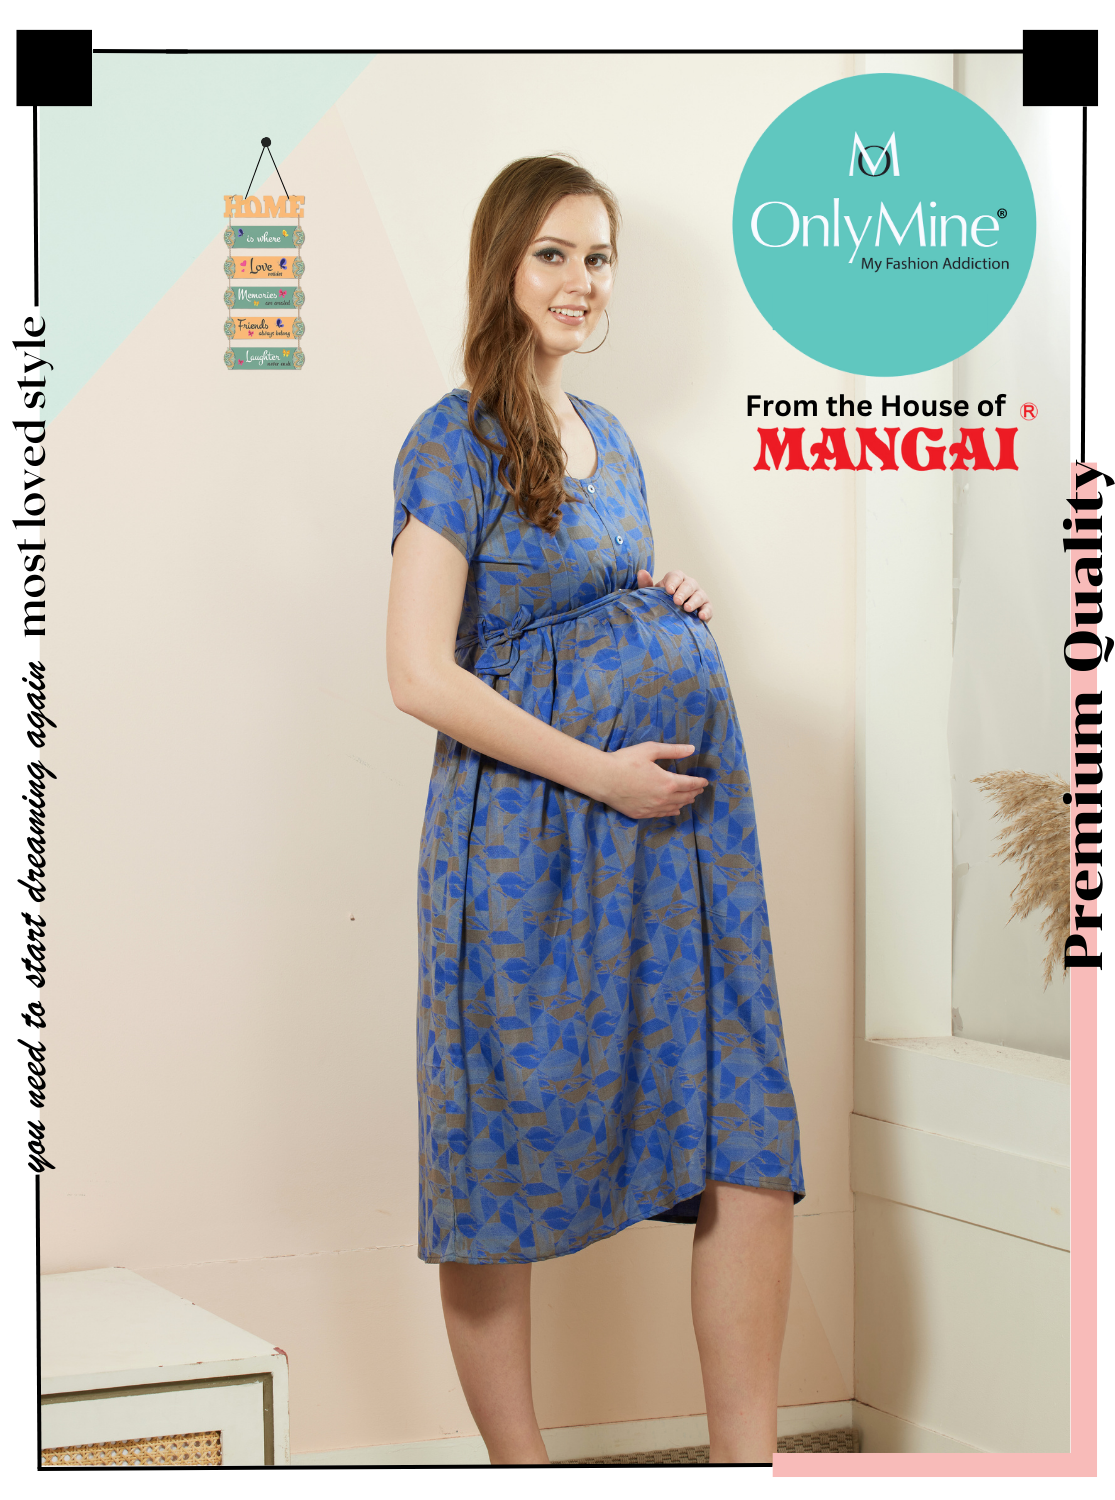 ONLY MINE Premium 4-IN-ONE Floral Print Mom's Wear | Stylish Maxi Moms Wear | Invisible Feeding Zipper | Perfect Pregnancy Wear